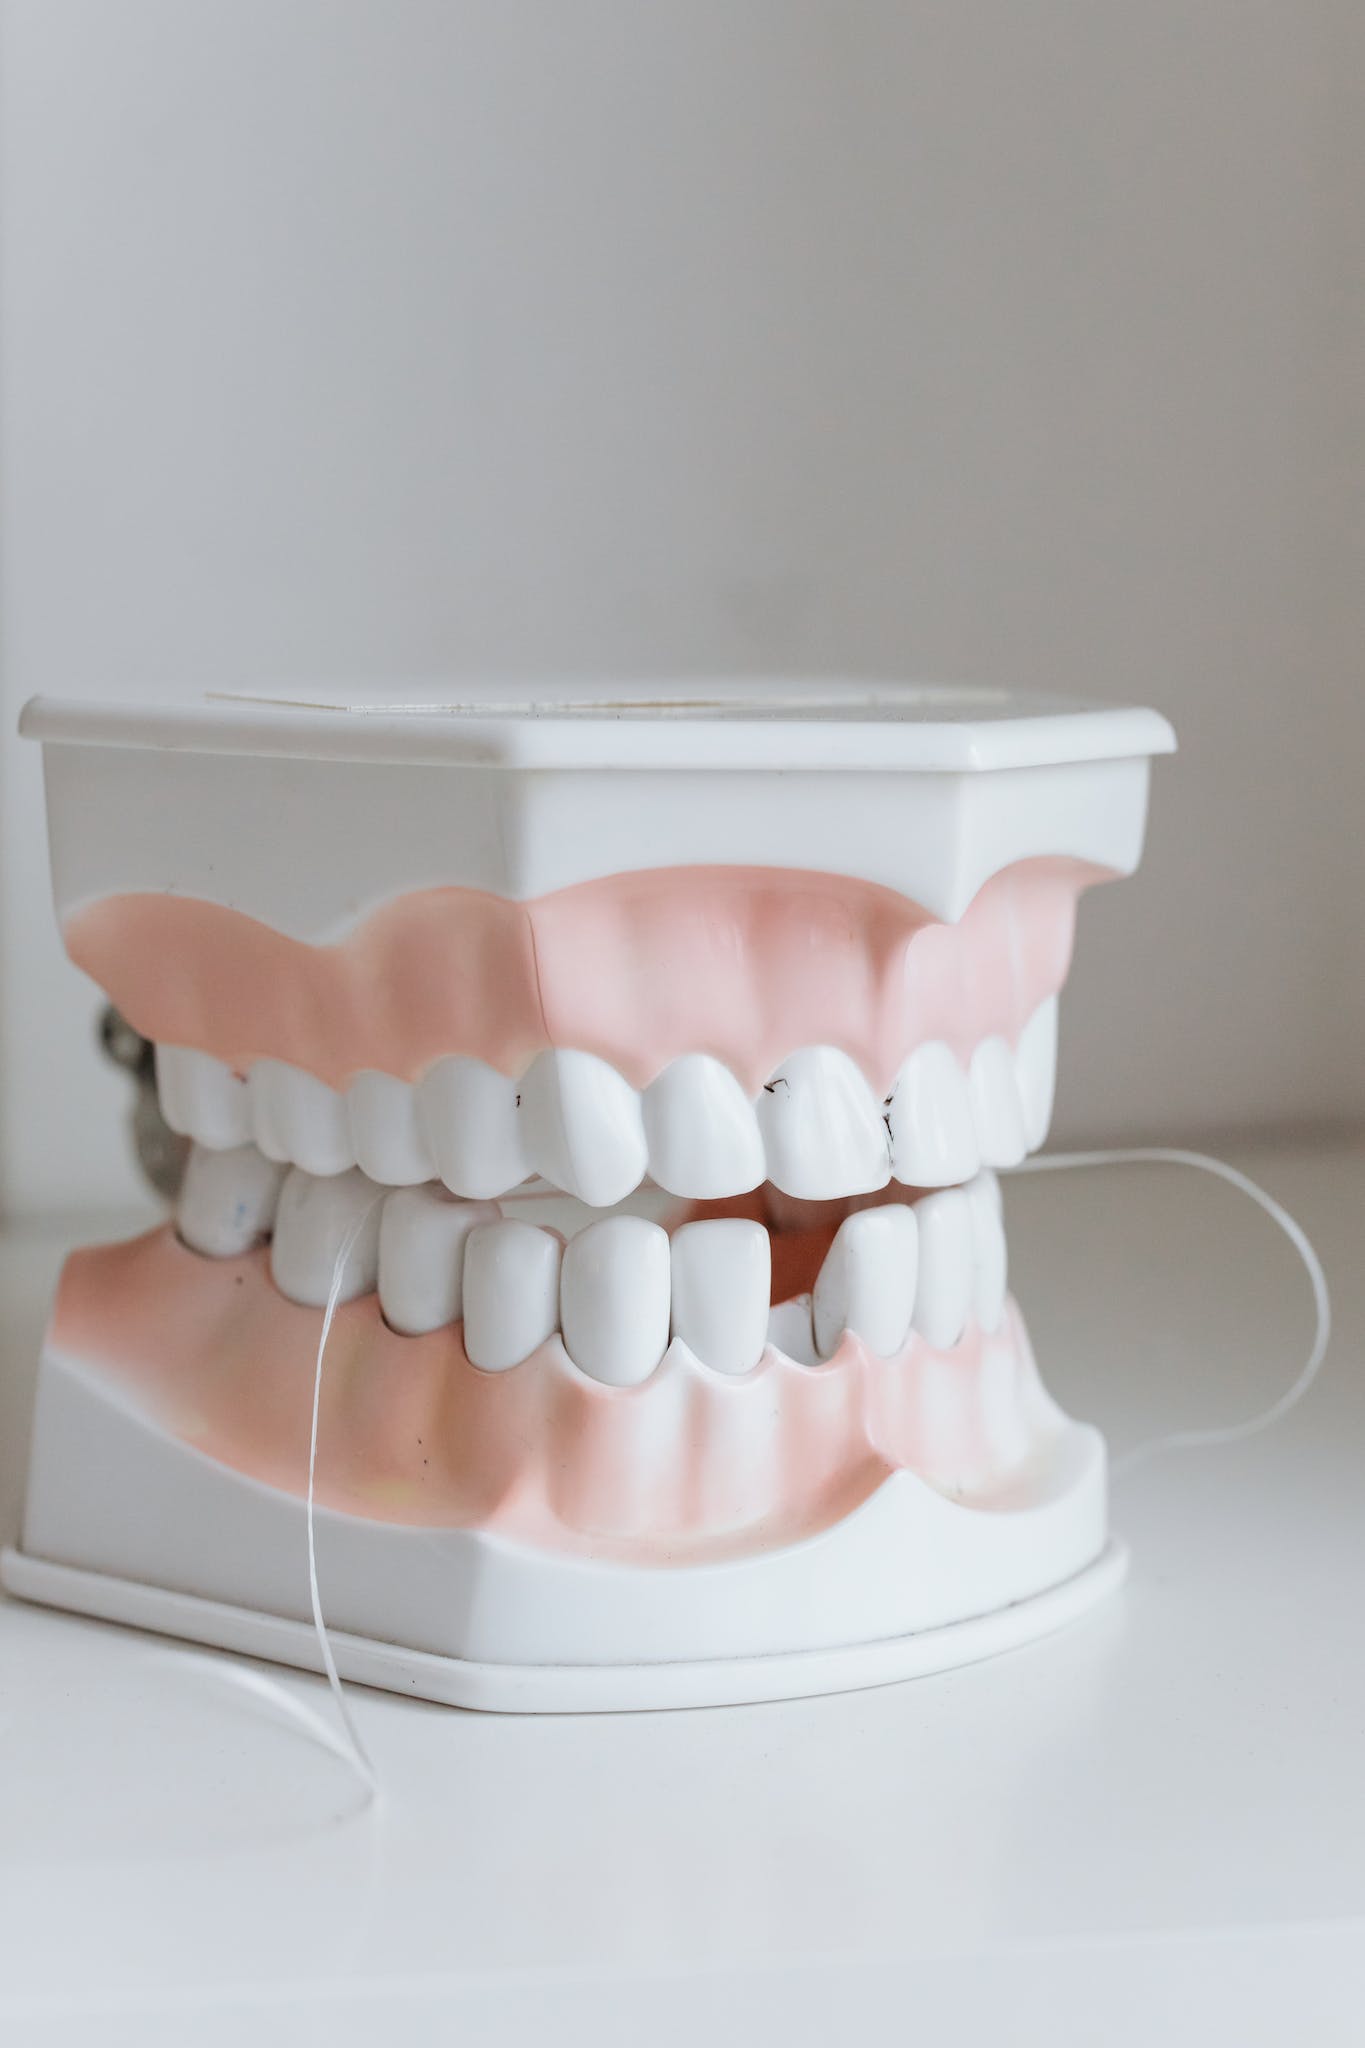 Close-Up Shot of a mouth model. Ivy Lane Dental offers teeth extractions in San Antonio, TX.